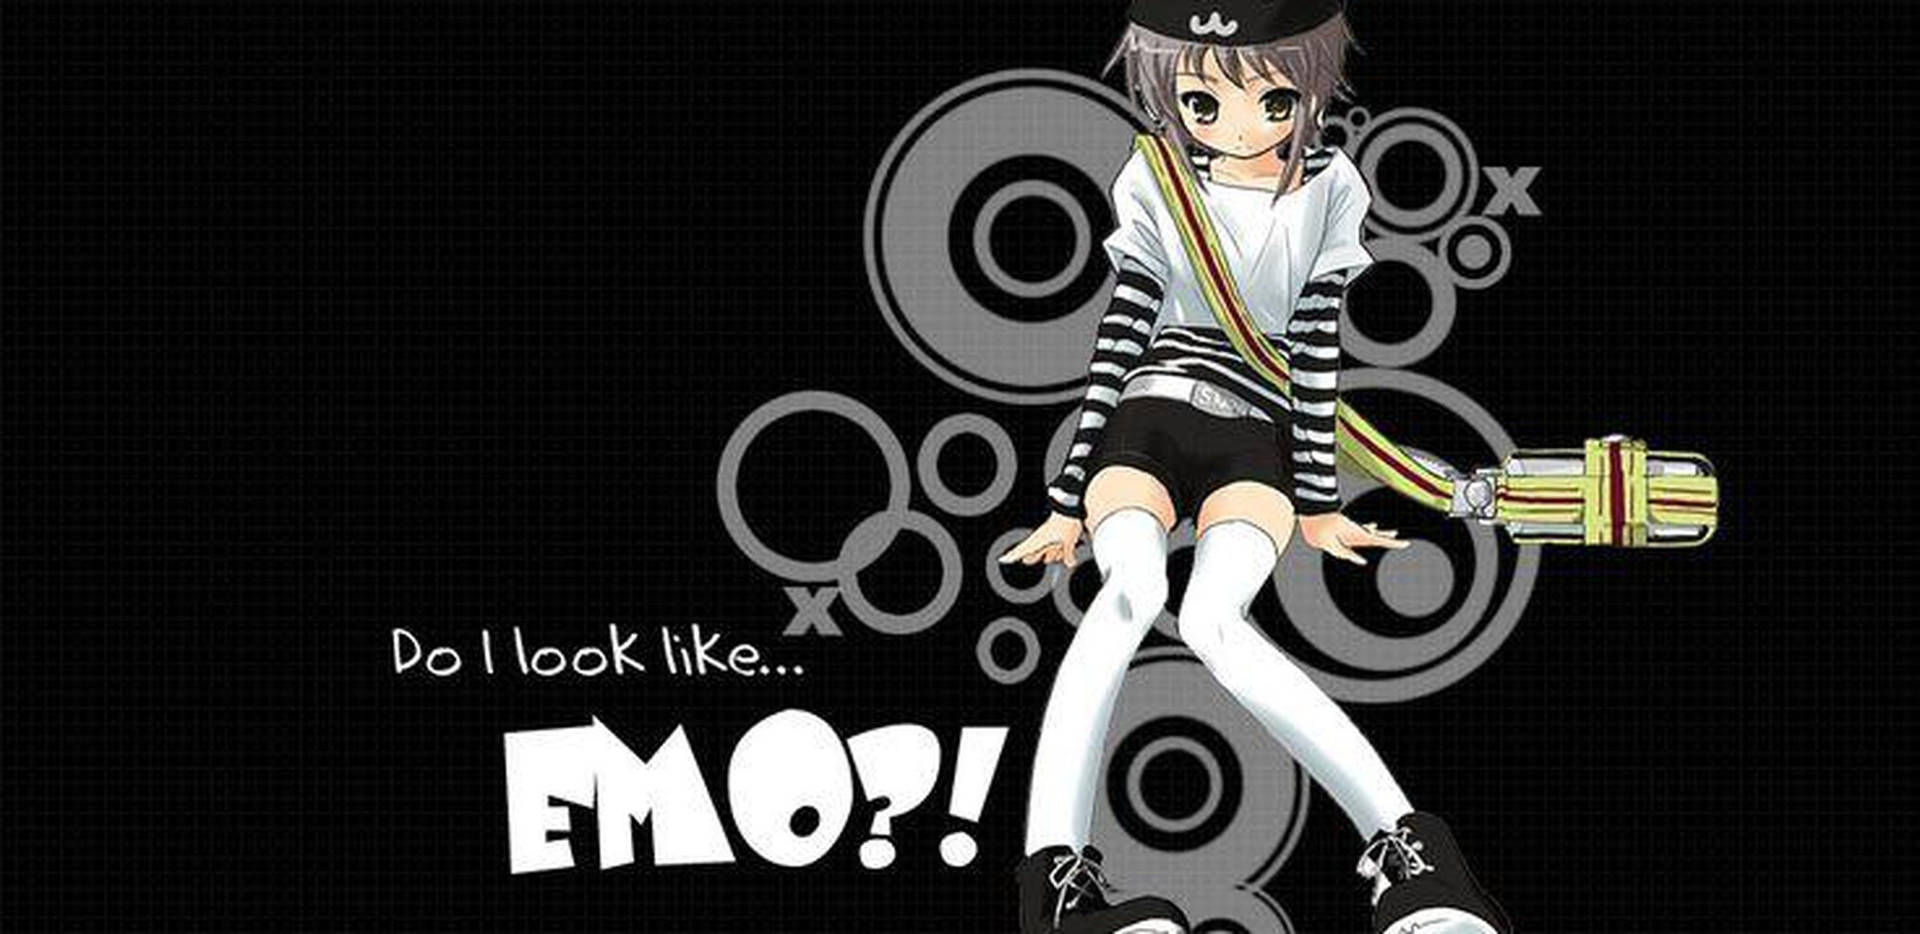 Free Emo Wallpaper Downloads, [100+] Emo Wallpapers for FREE | Wallpapers .com